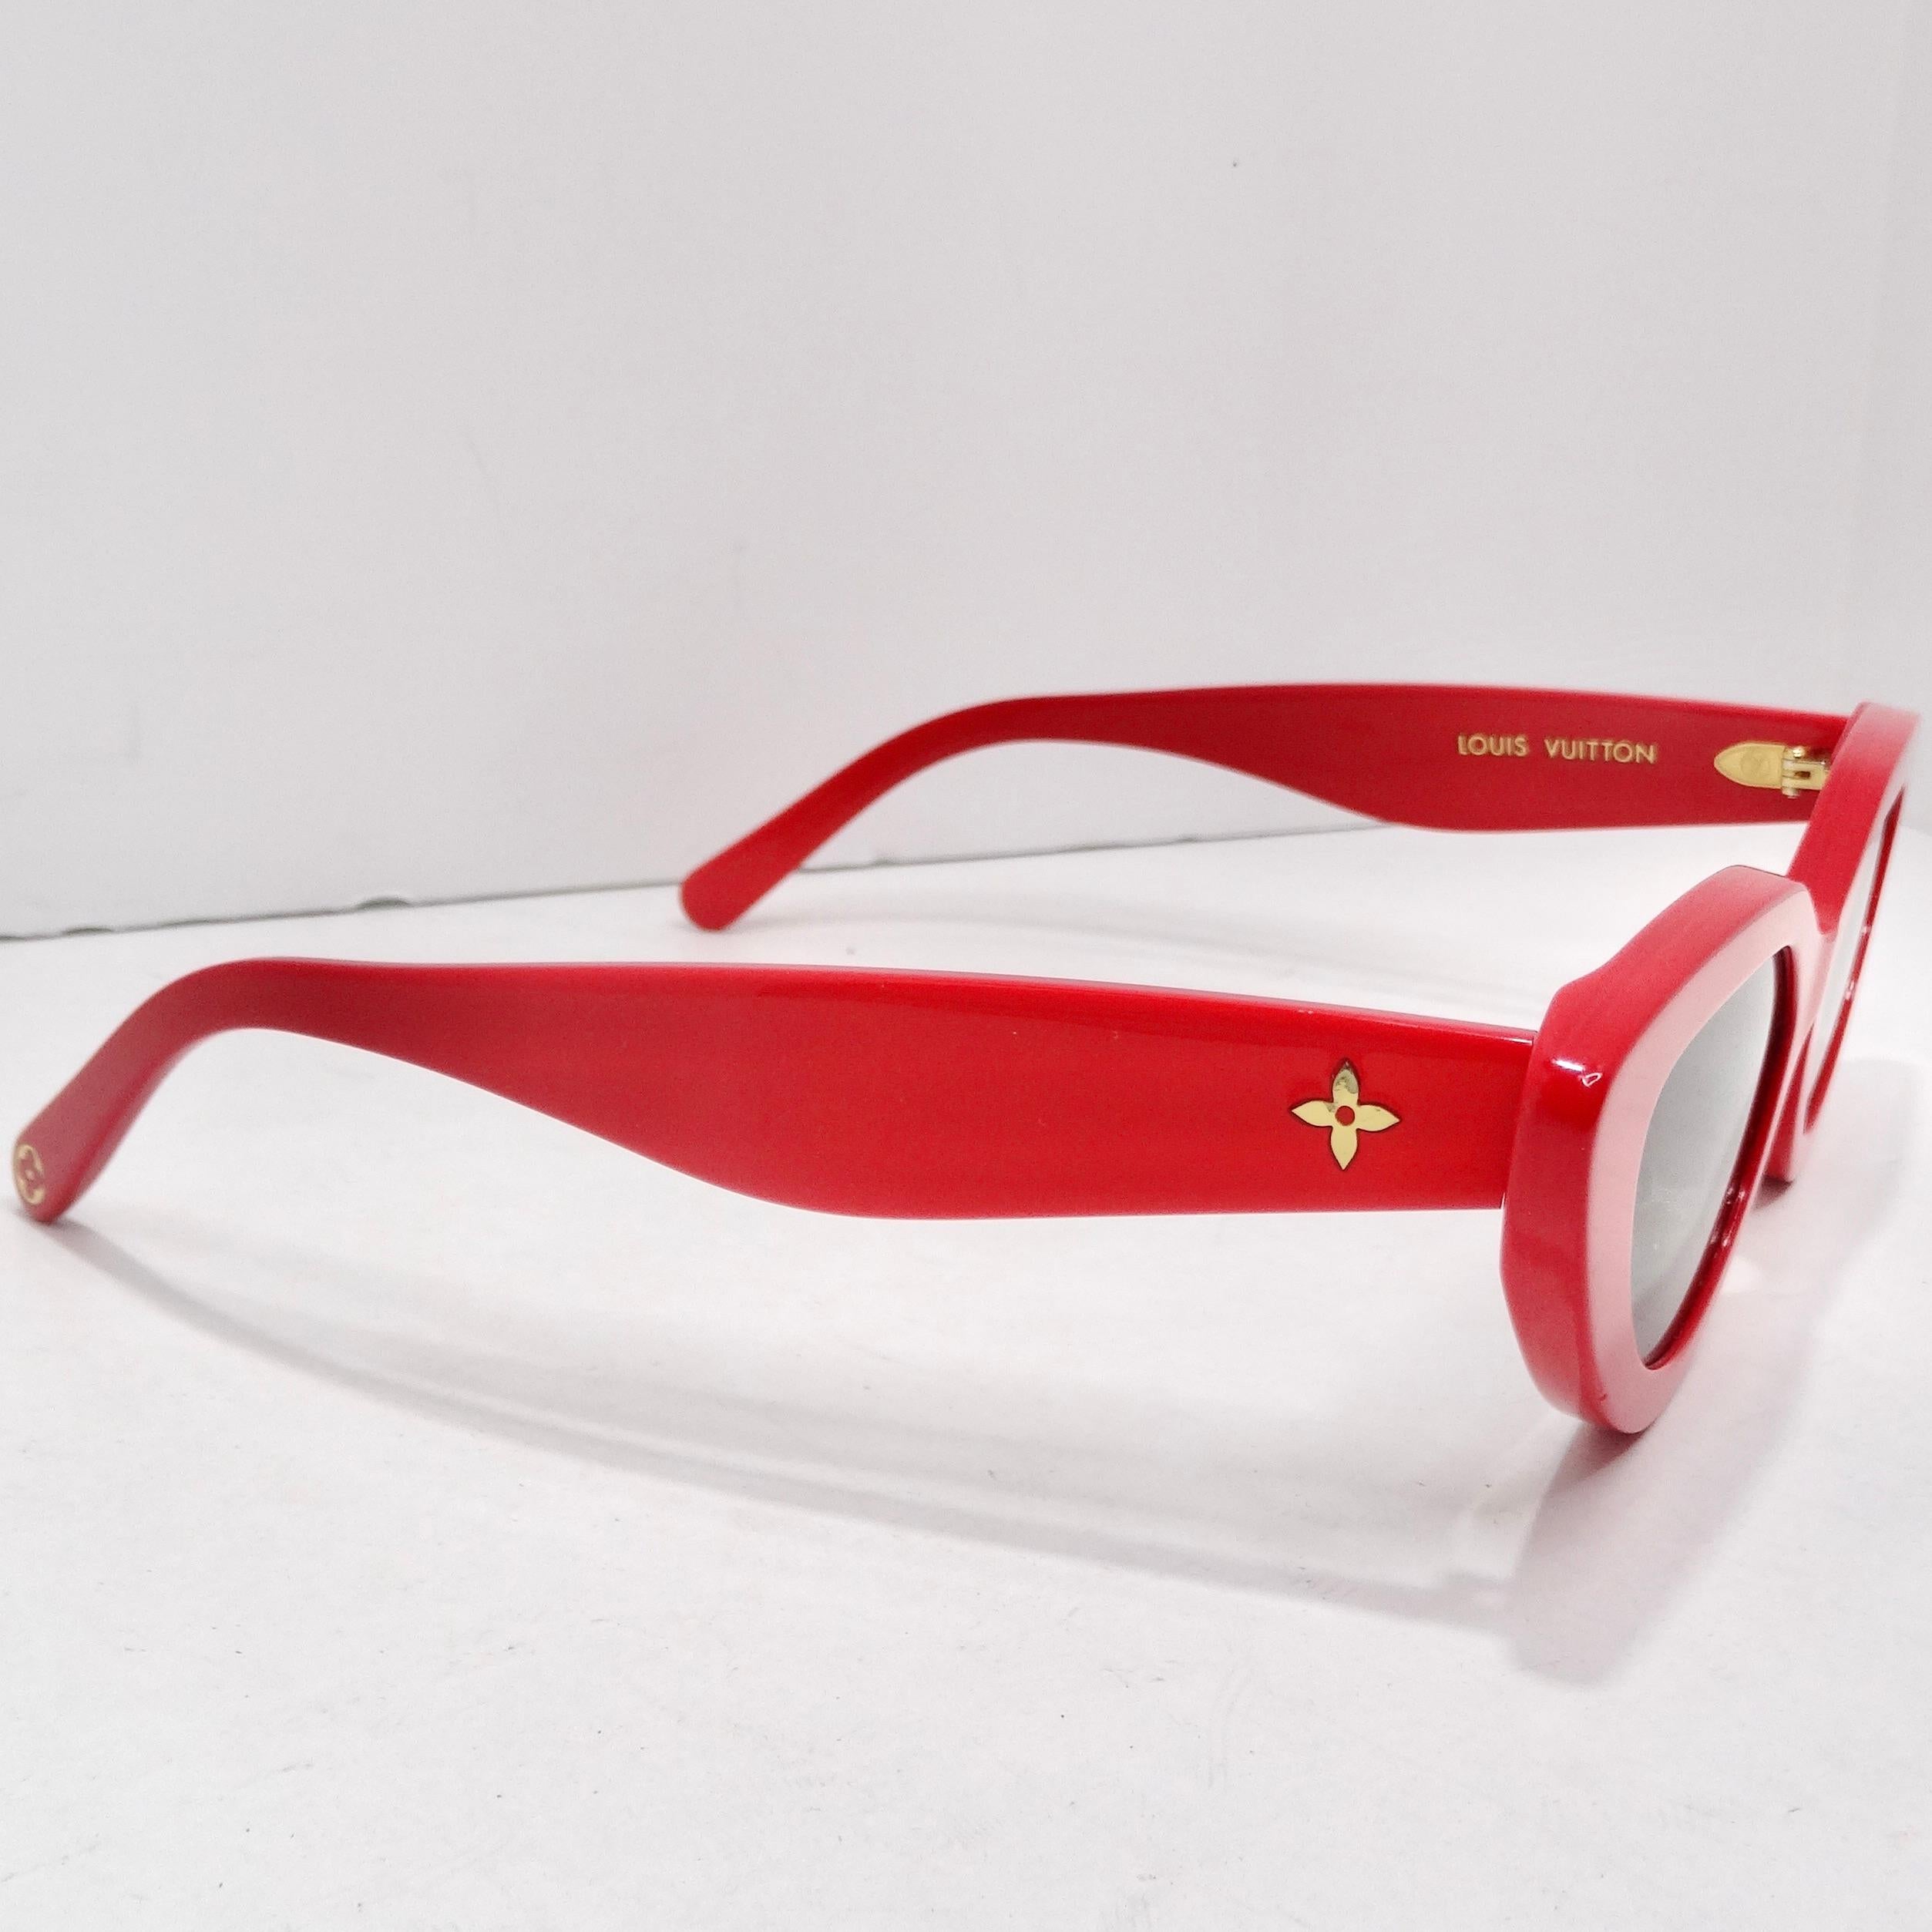 Louis Vuitton My LV Cat Eye Sunglasses Red In Excellent Condition For Sale In Scottsdale, AZ